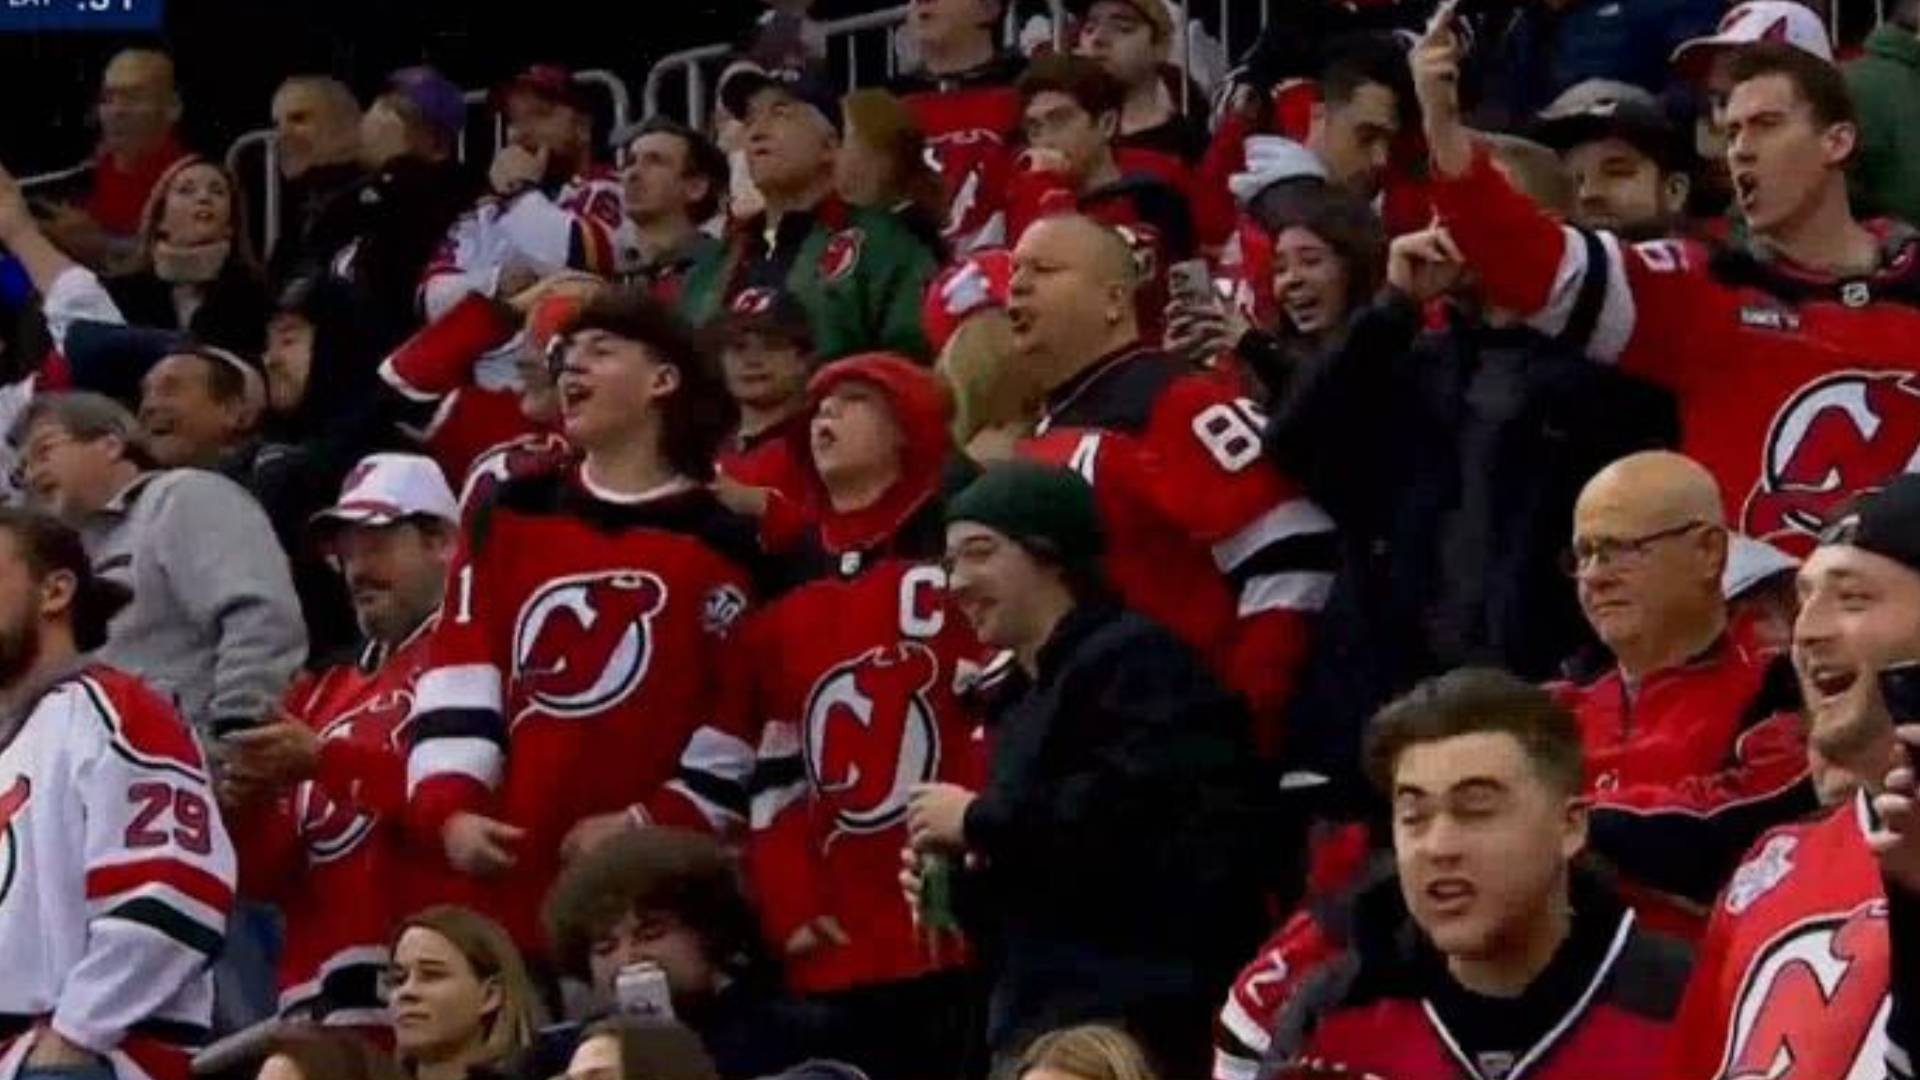 Angry New Jersey Devils fans throw beer onto the ice at Maple Leafs